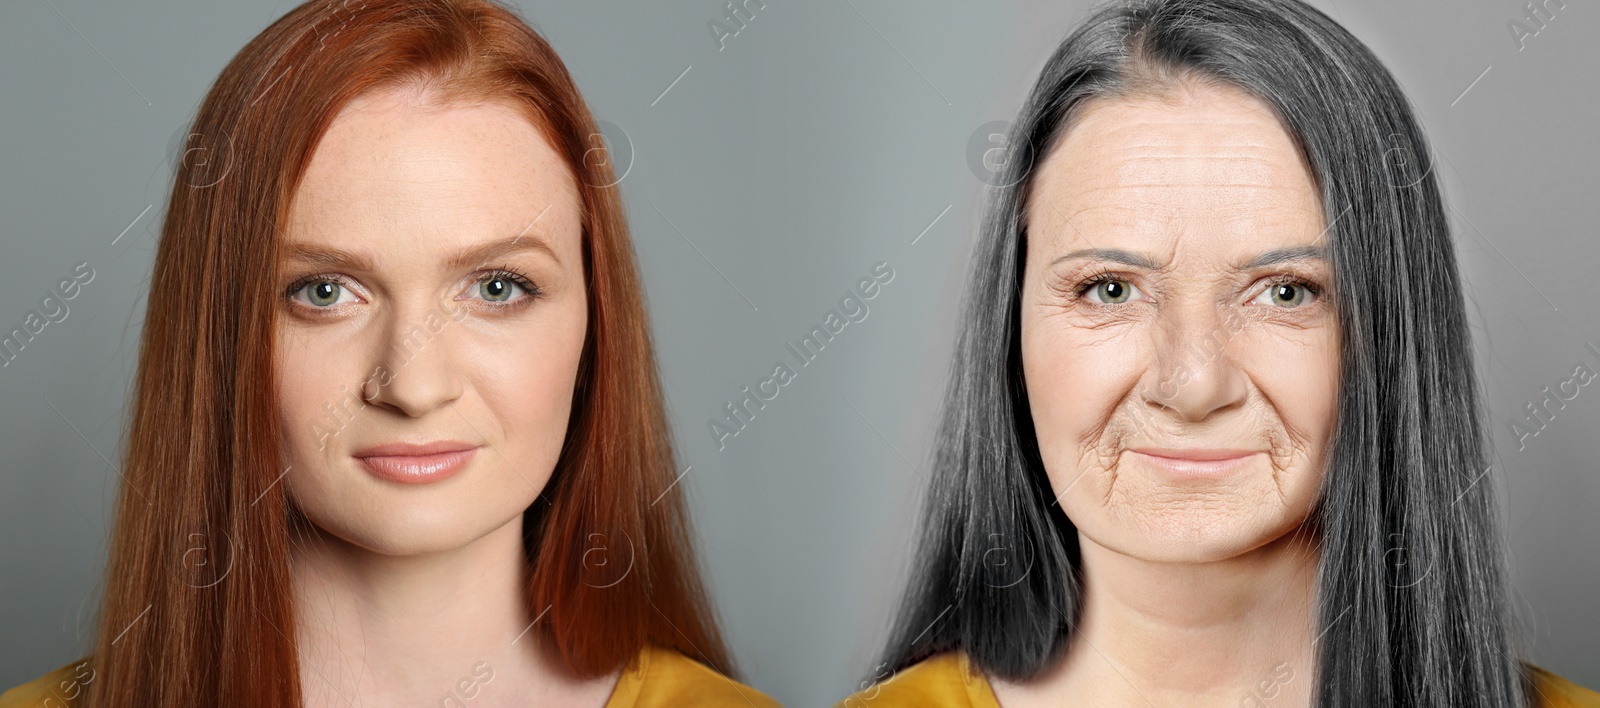 Image of Collage with photos of woman in different ages on grey background